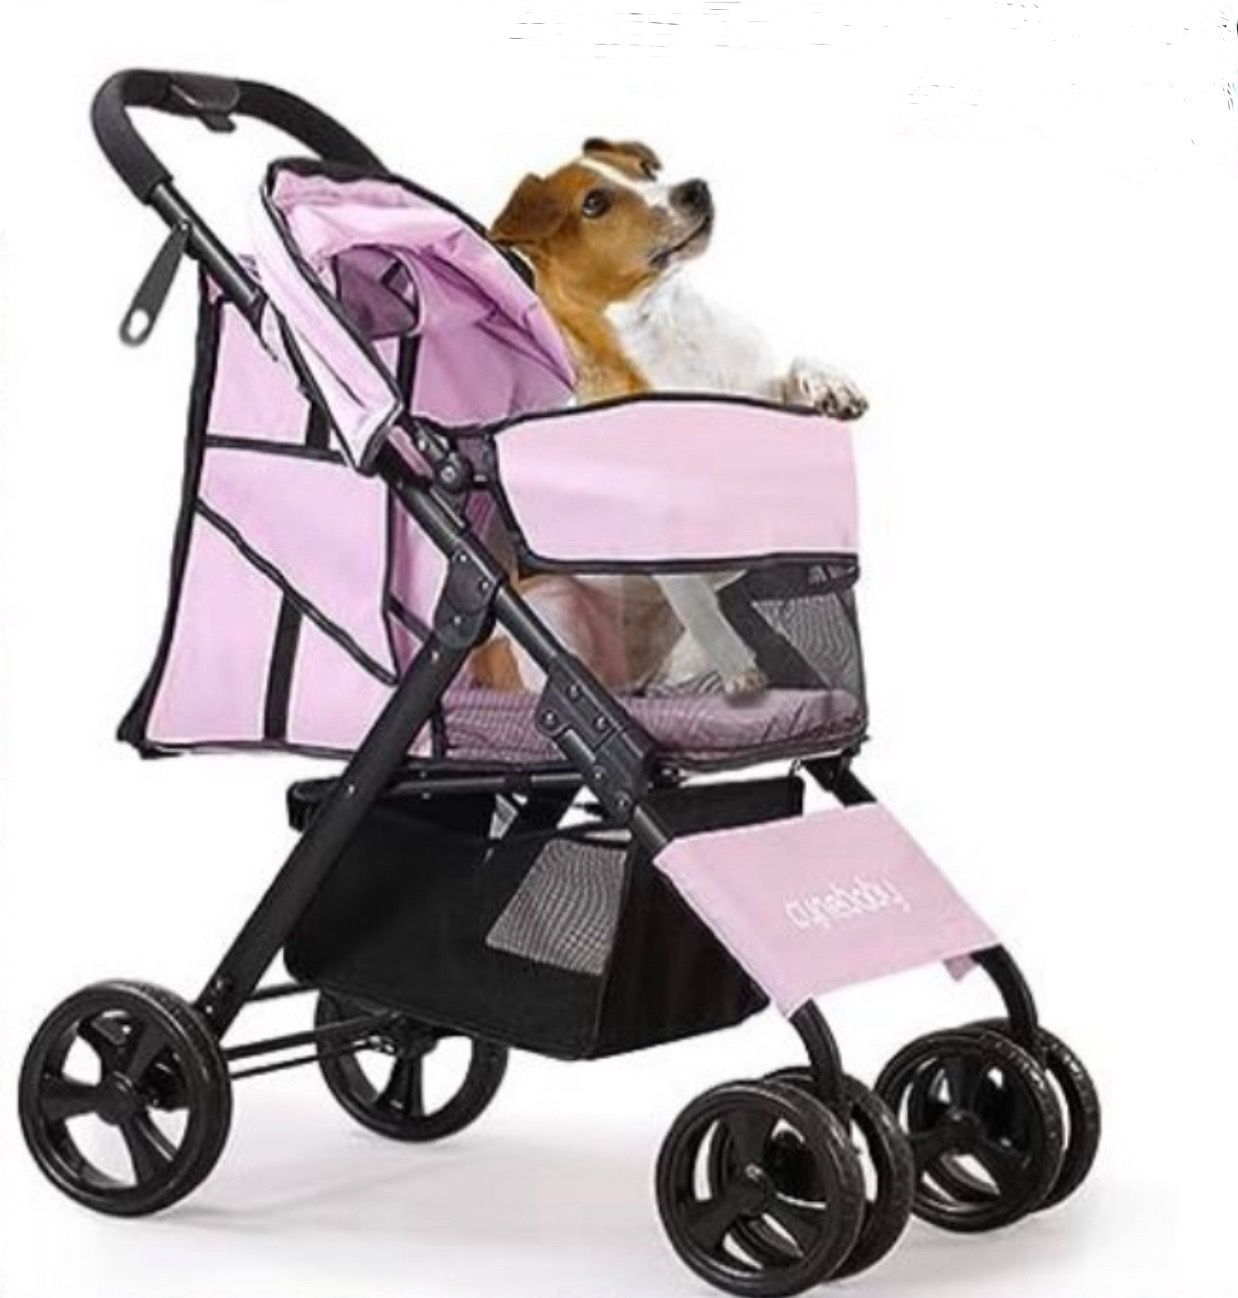 Pet Stroller for Cat Dog - 4 Wheels Foldable Traveling Lightweight Animal Gear Carriage for Small Medium Size Dogs & Cats Color Lilac 